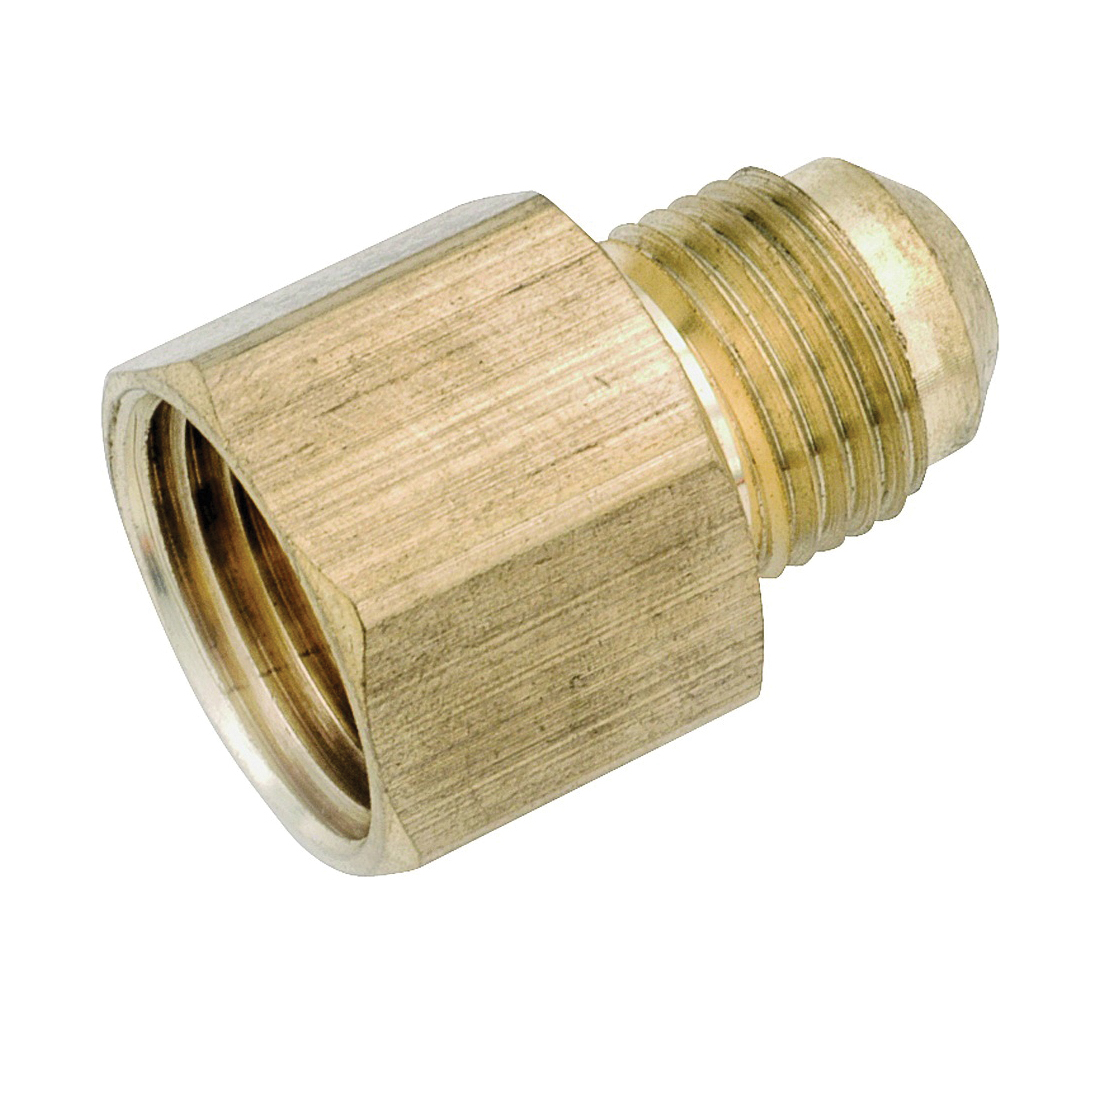 Anderson Metals 754046-0812 Tube Coupling, 1/2 x 3/4 in, Flare x FNPT, Brass - 1